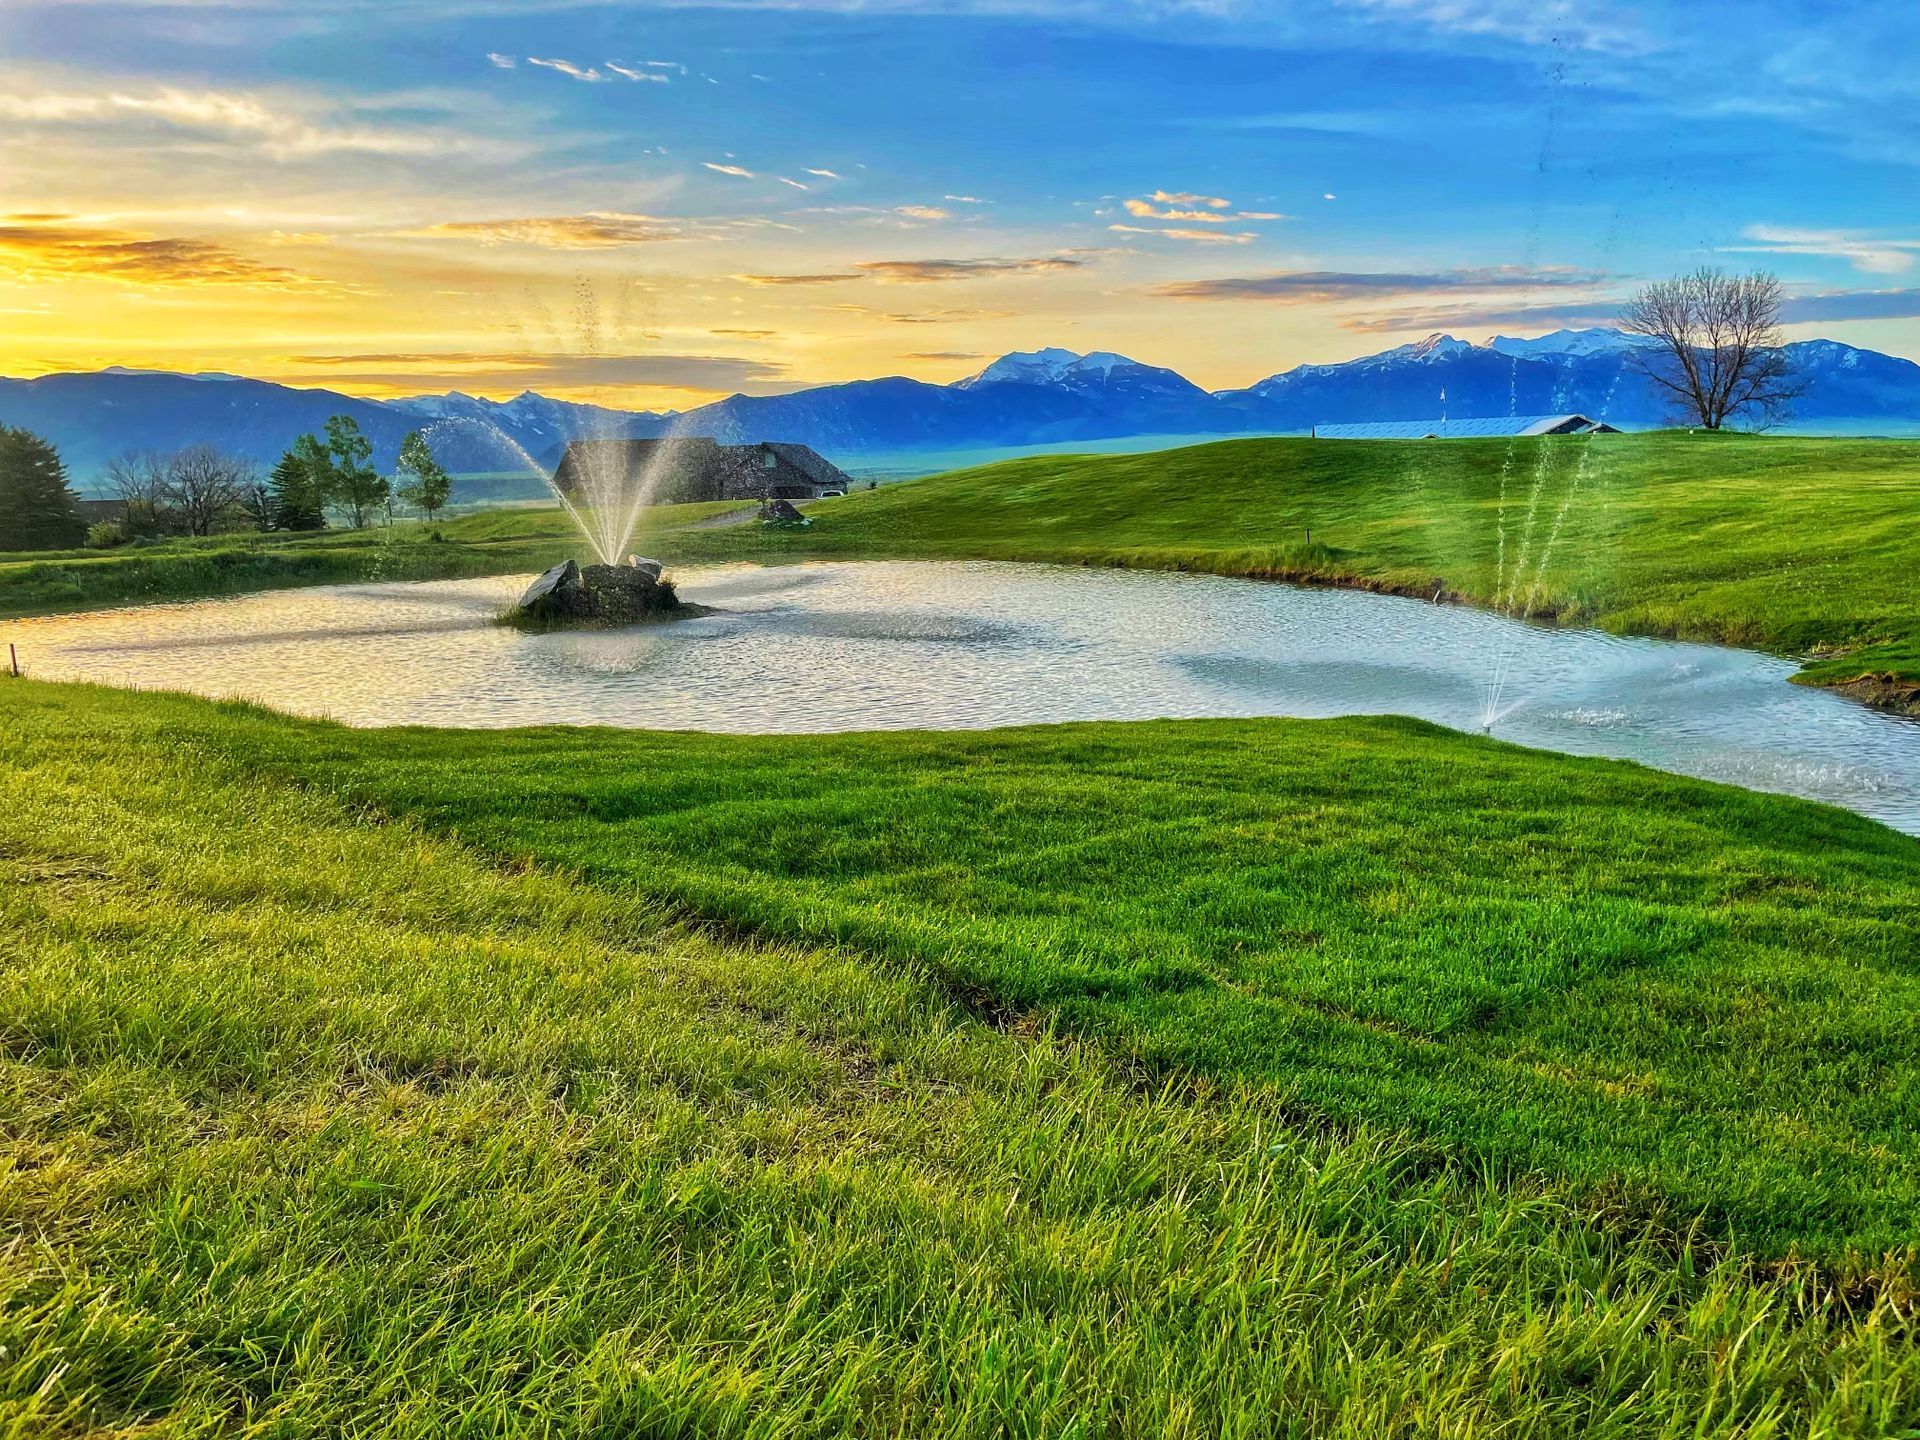 A small pond with a fountain in the middle of a grassy field.